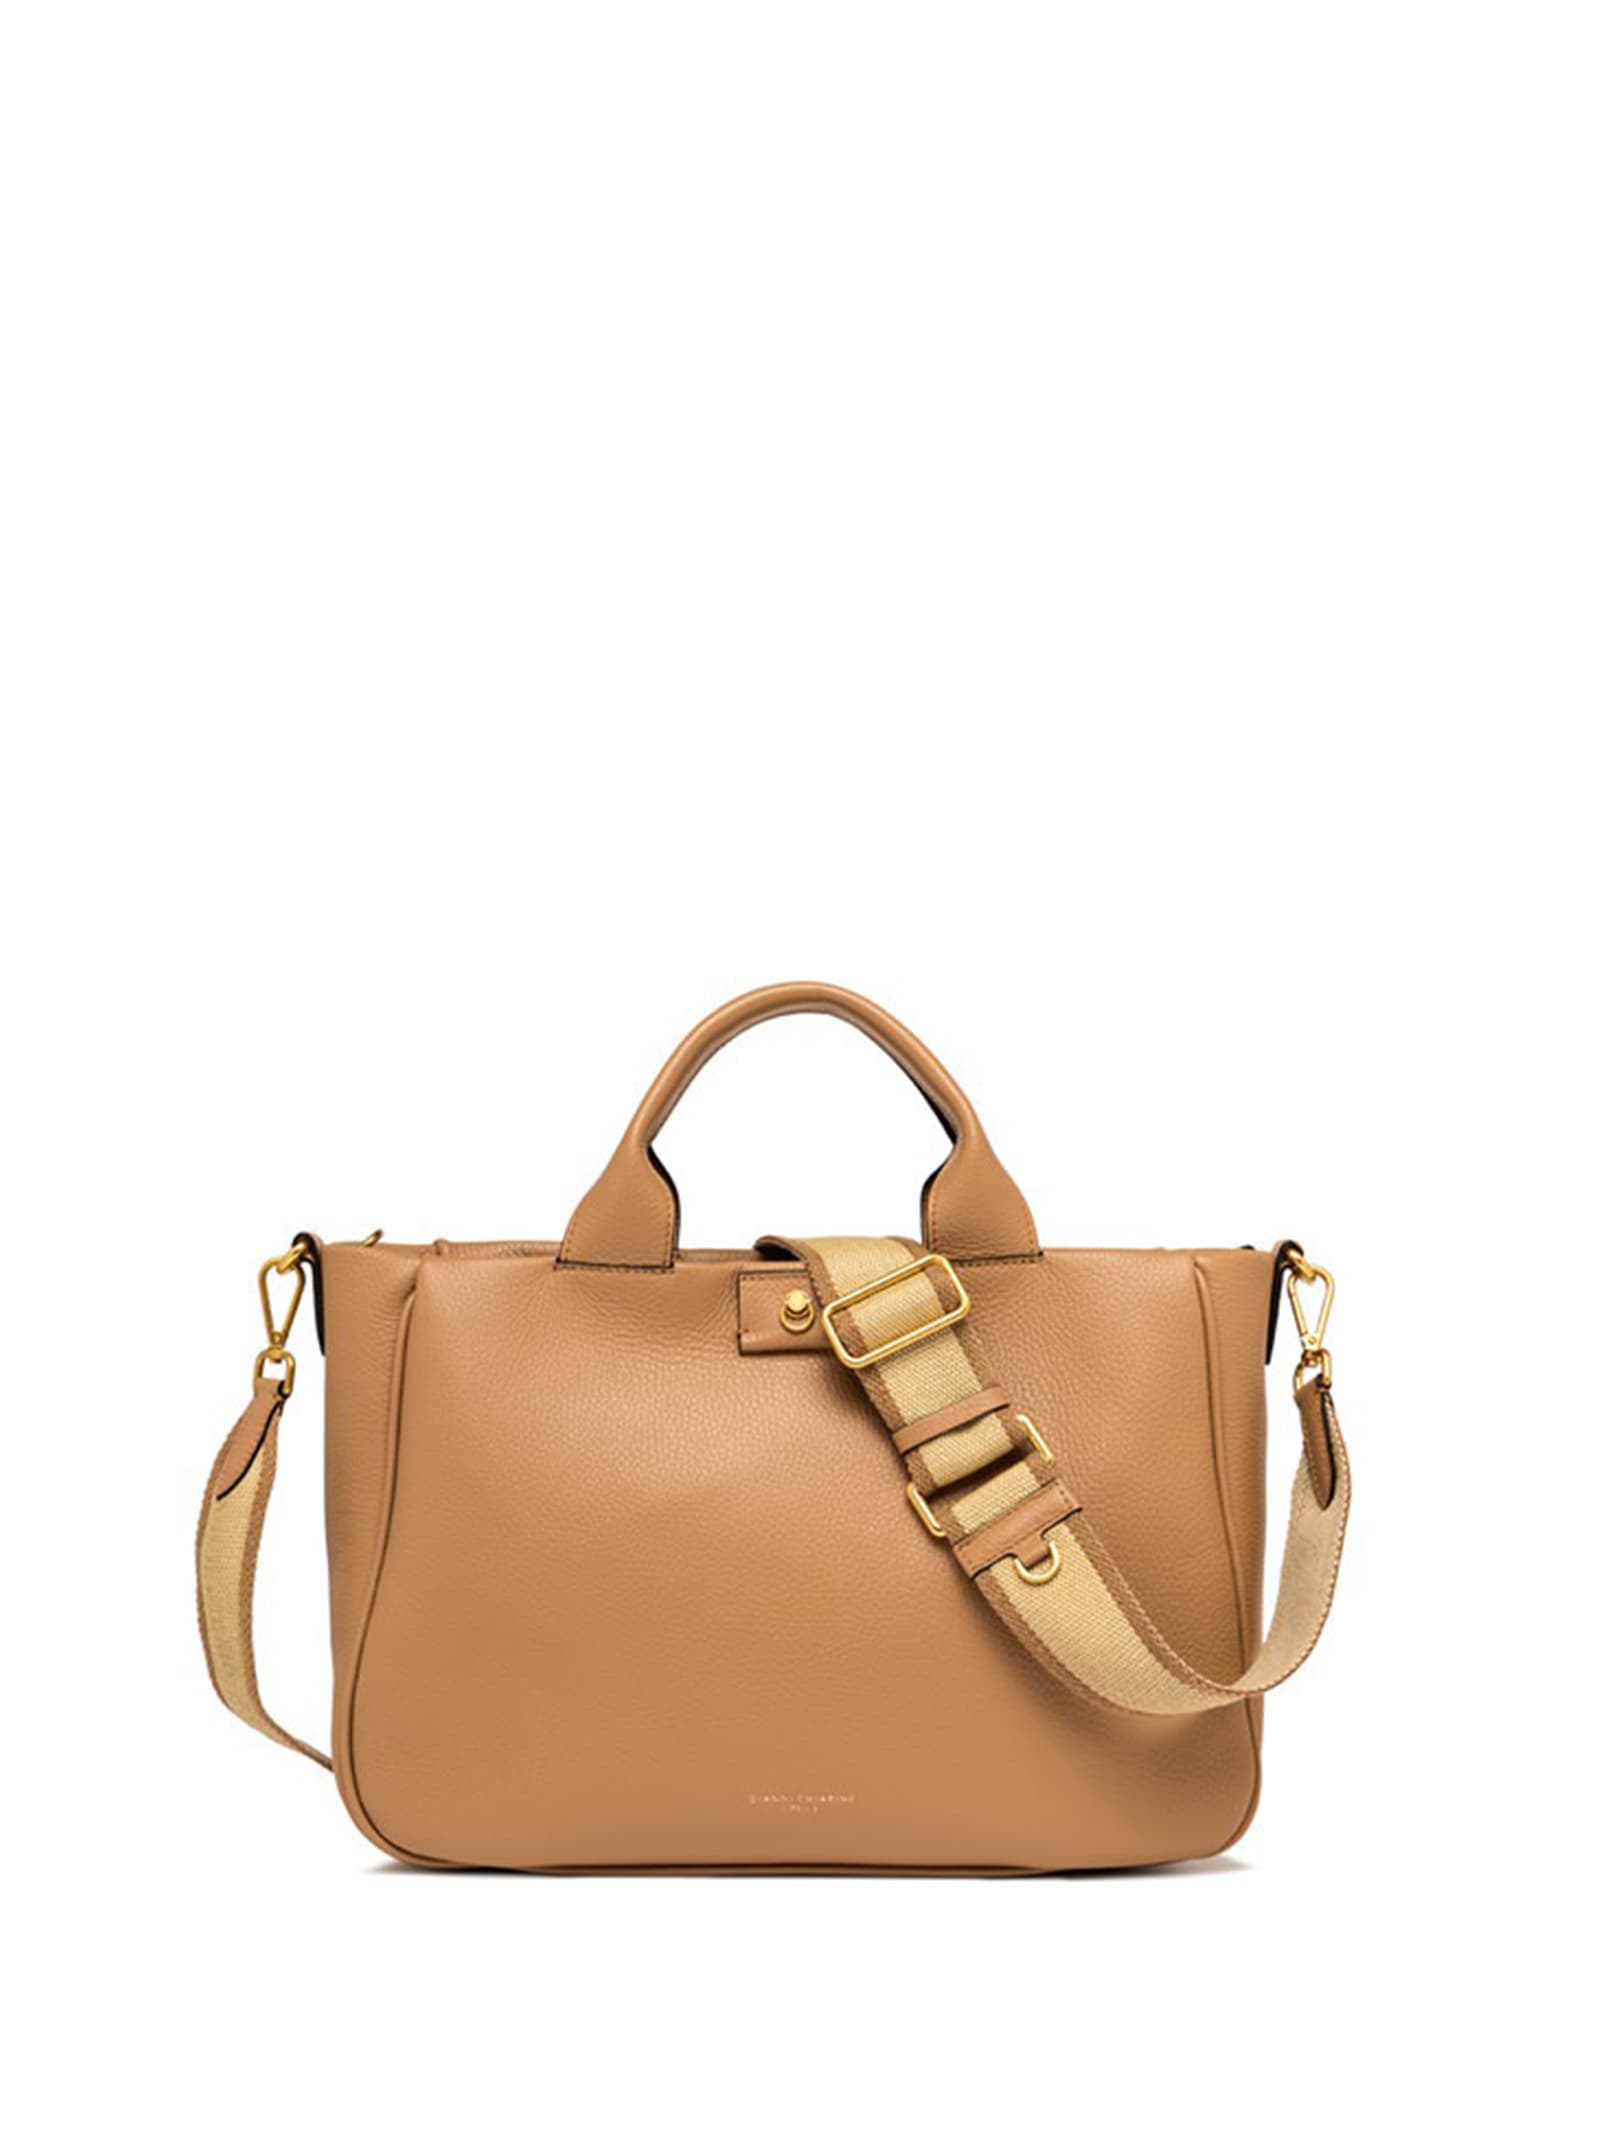 Gianni Chiarini Armonia Nude Shoulder Bag With Double Handle In Nature